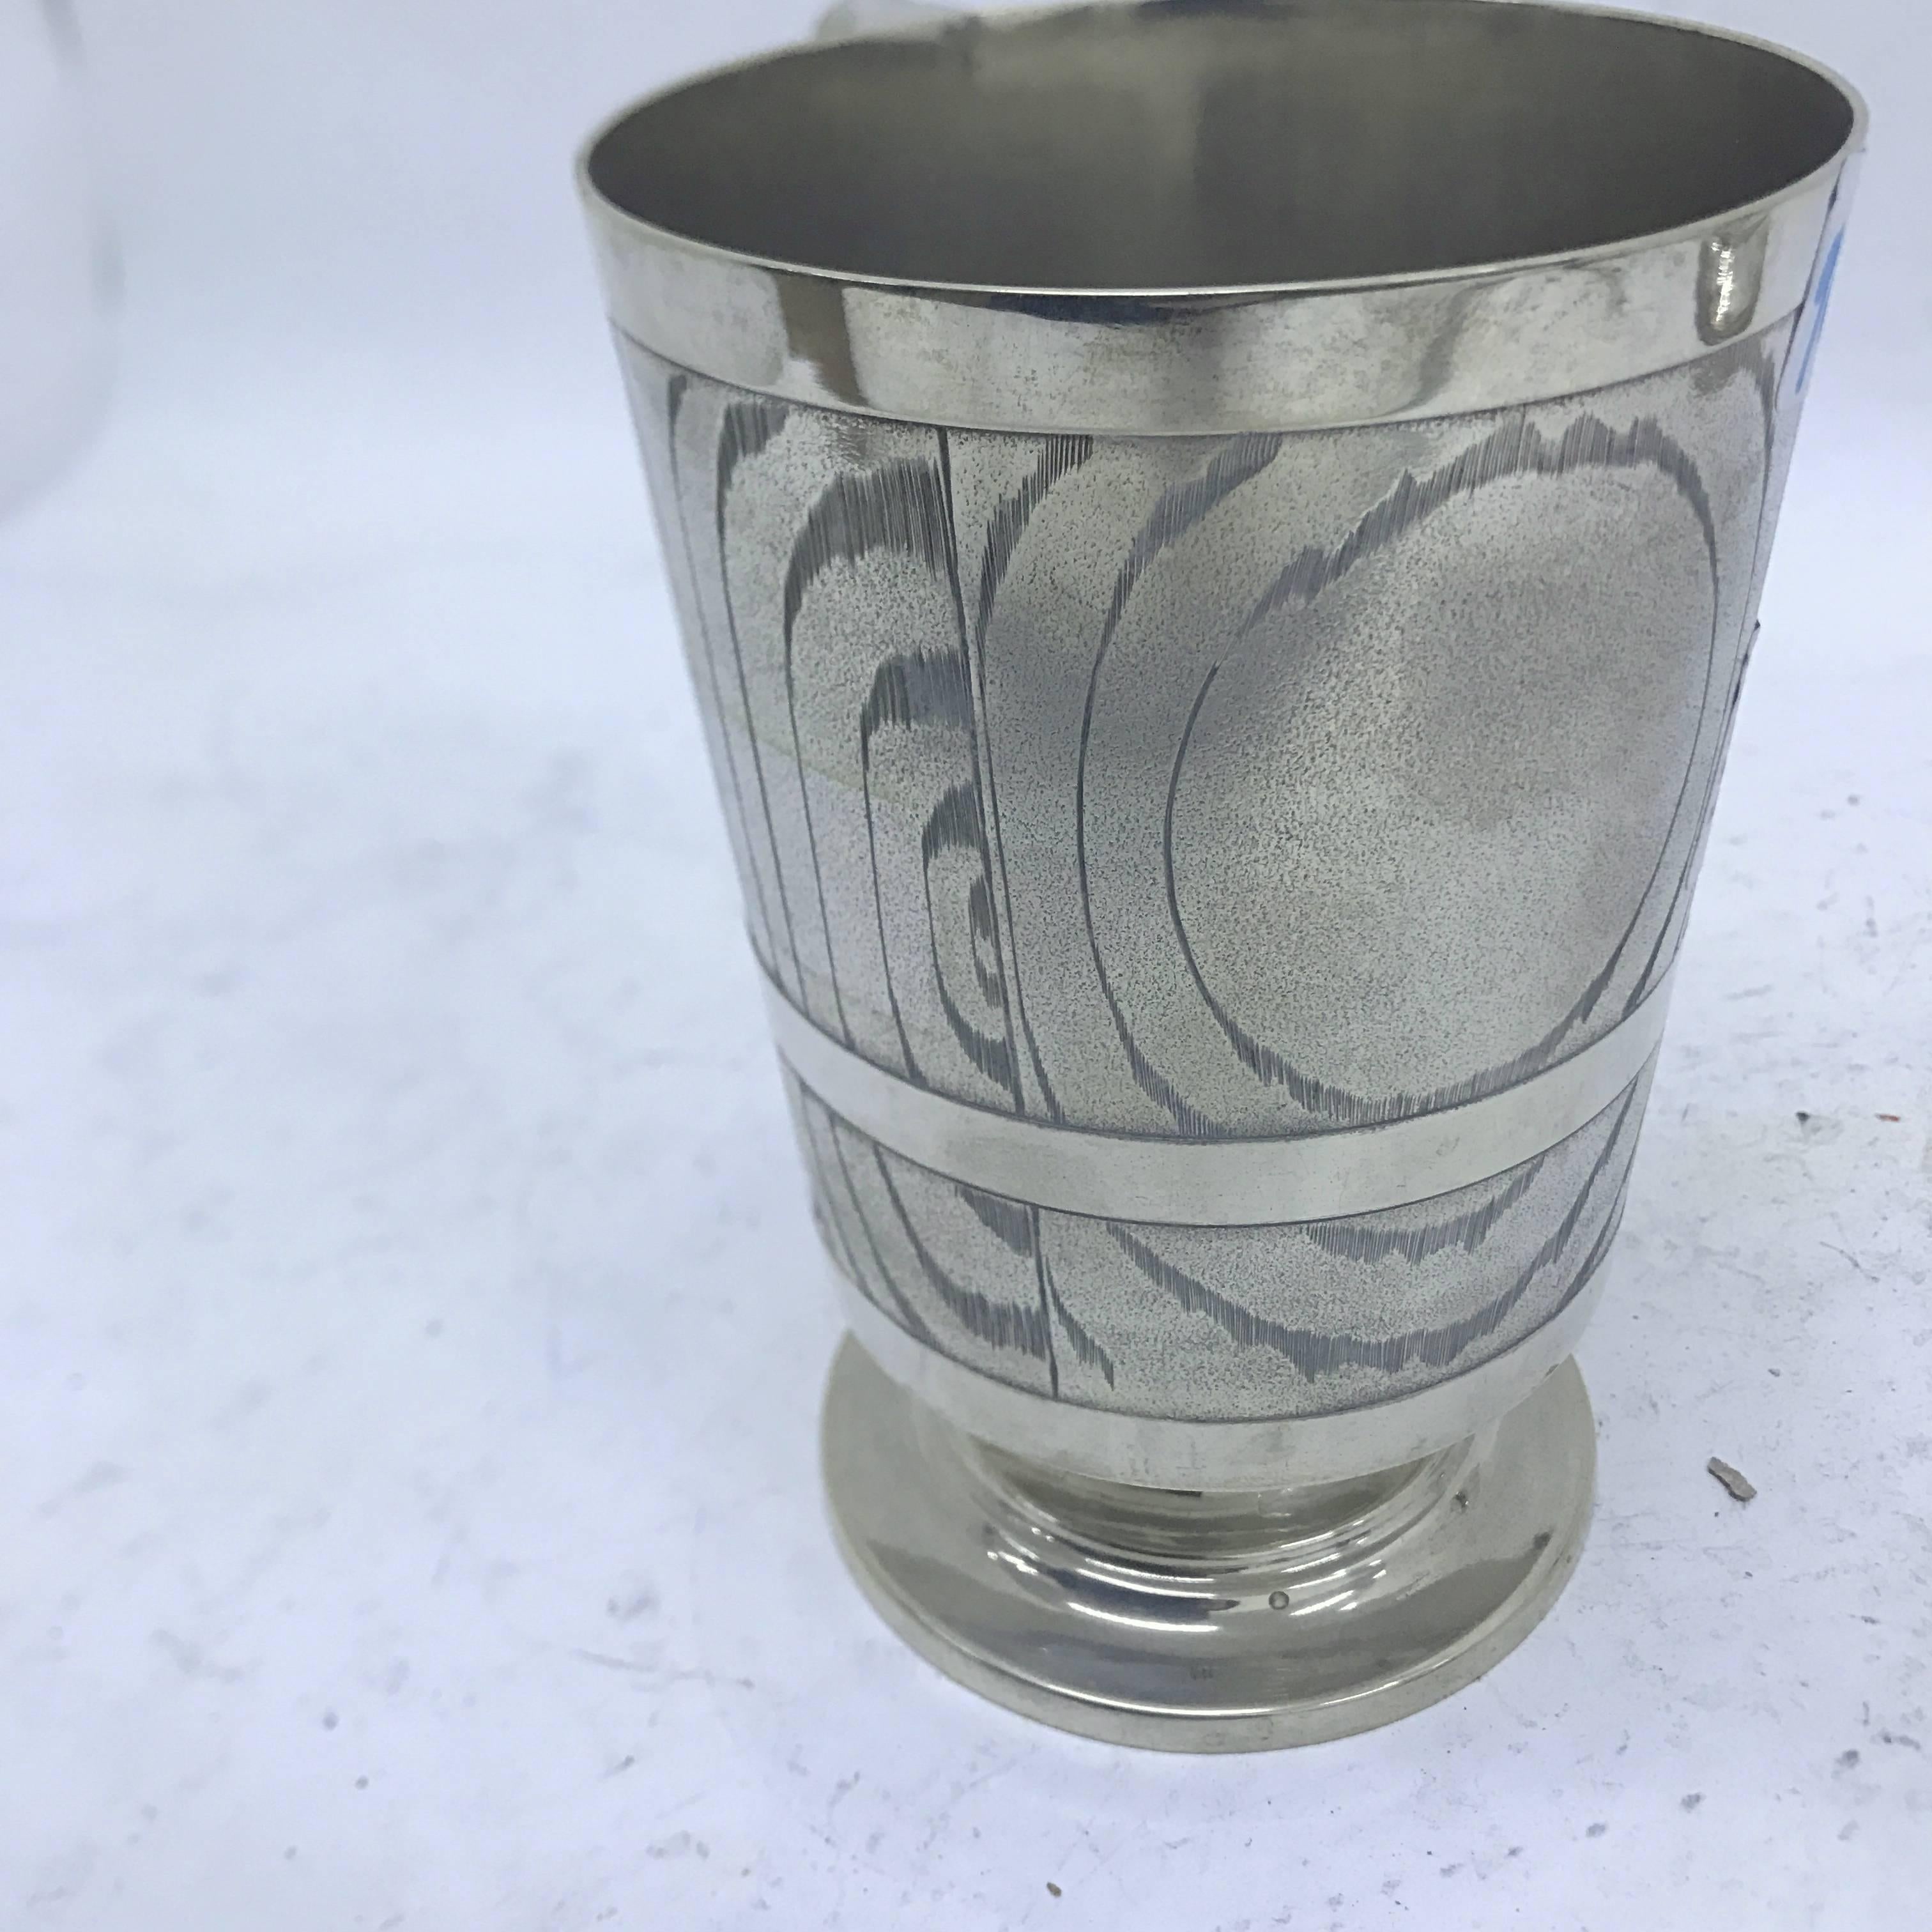 Unusual English mug, Victorian period, marked with diamond registration mark, engraved like a tree root, with un head on the handle. Amazing quality and perfect conditions.